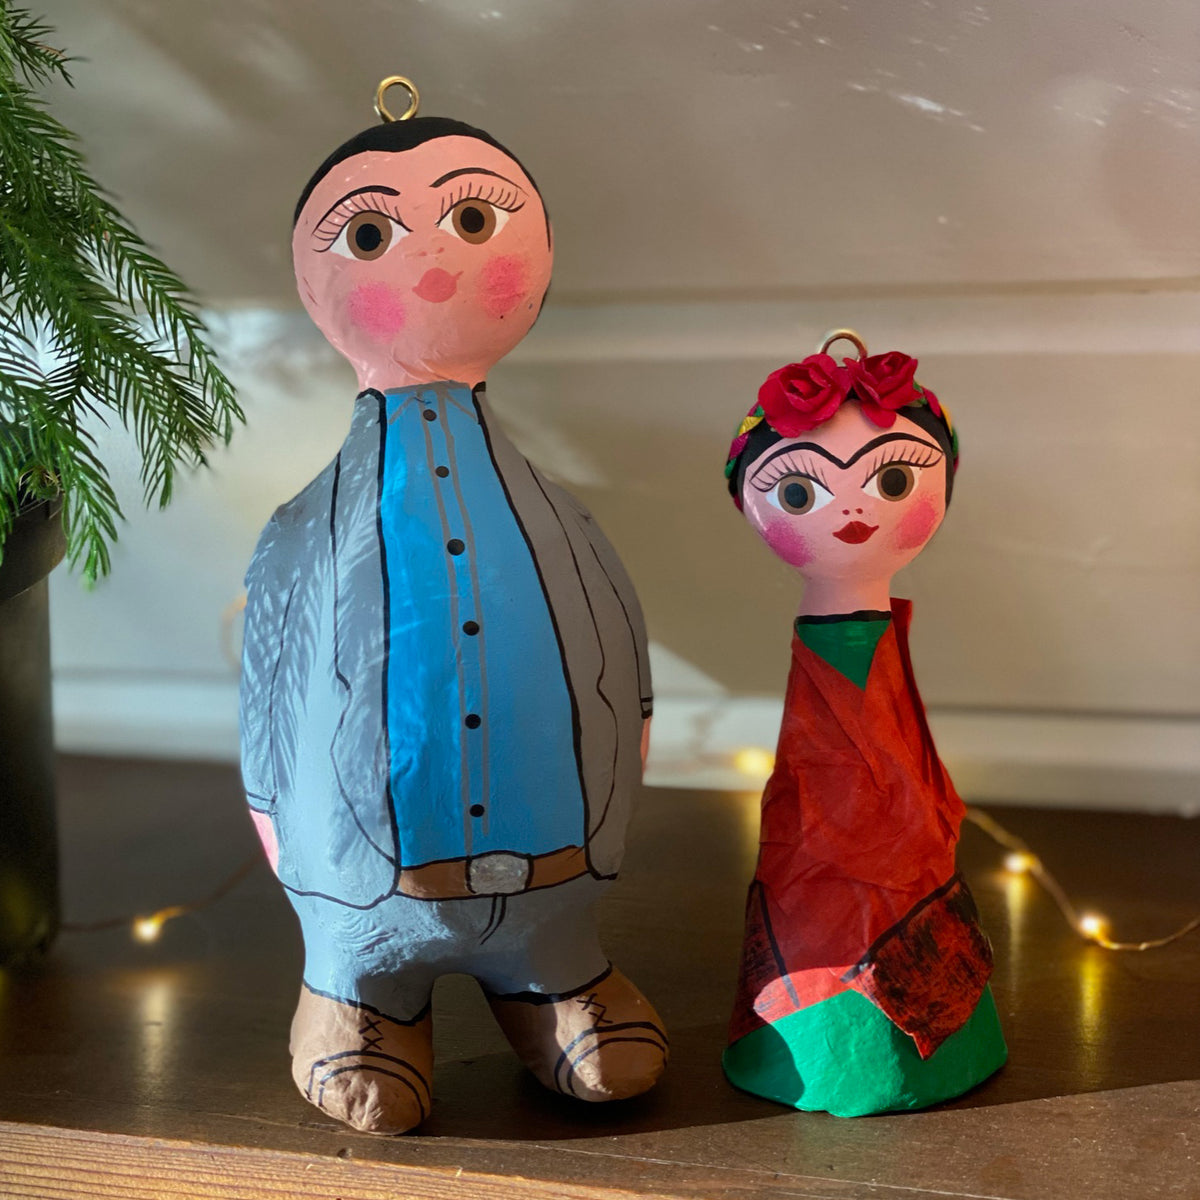 Tall Diego and Frida ornaments side by side on a table.